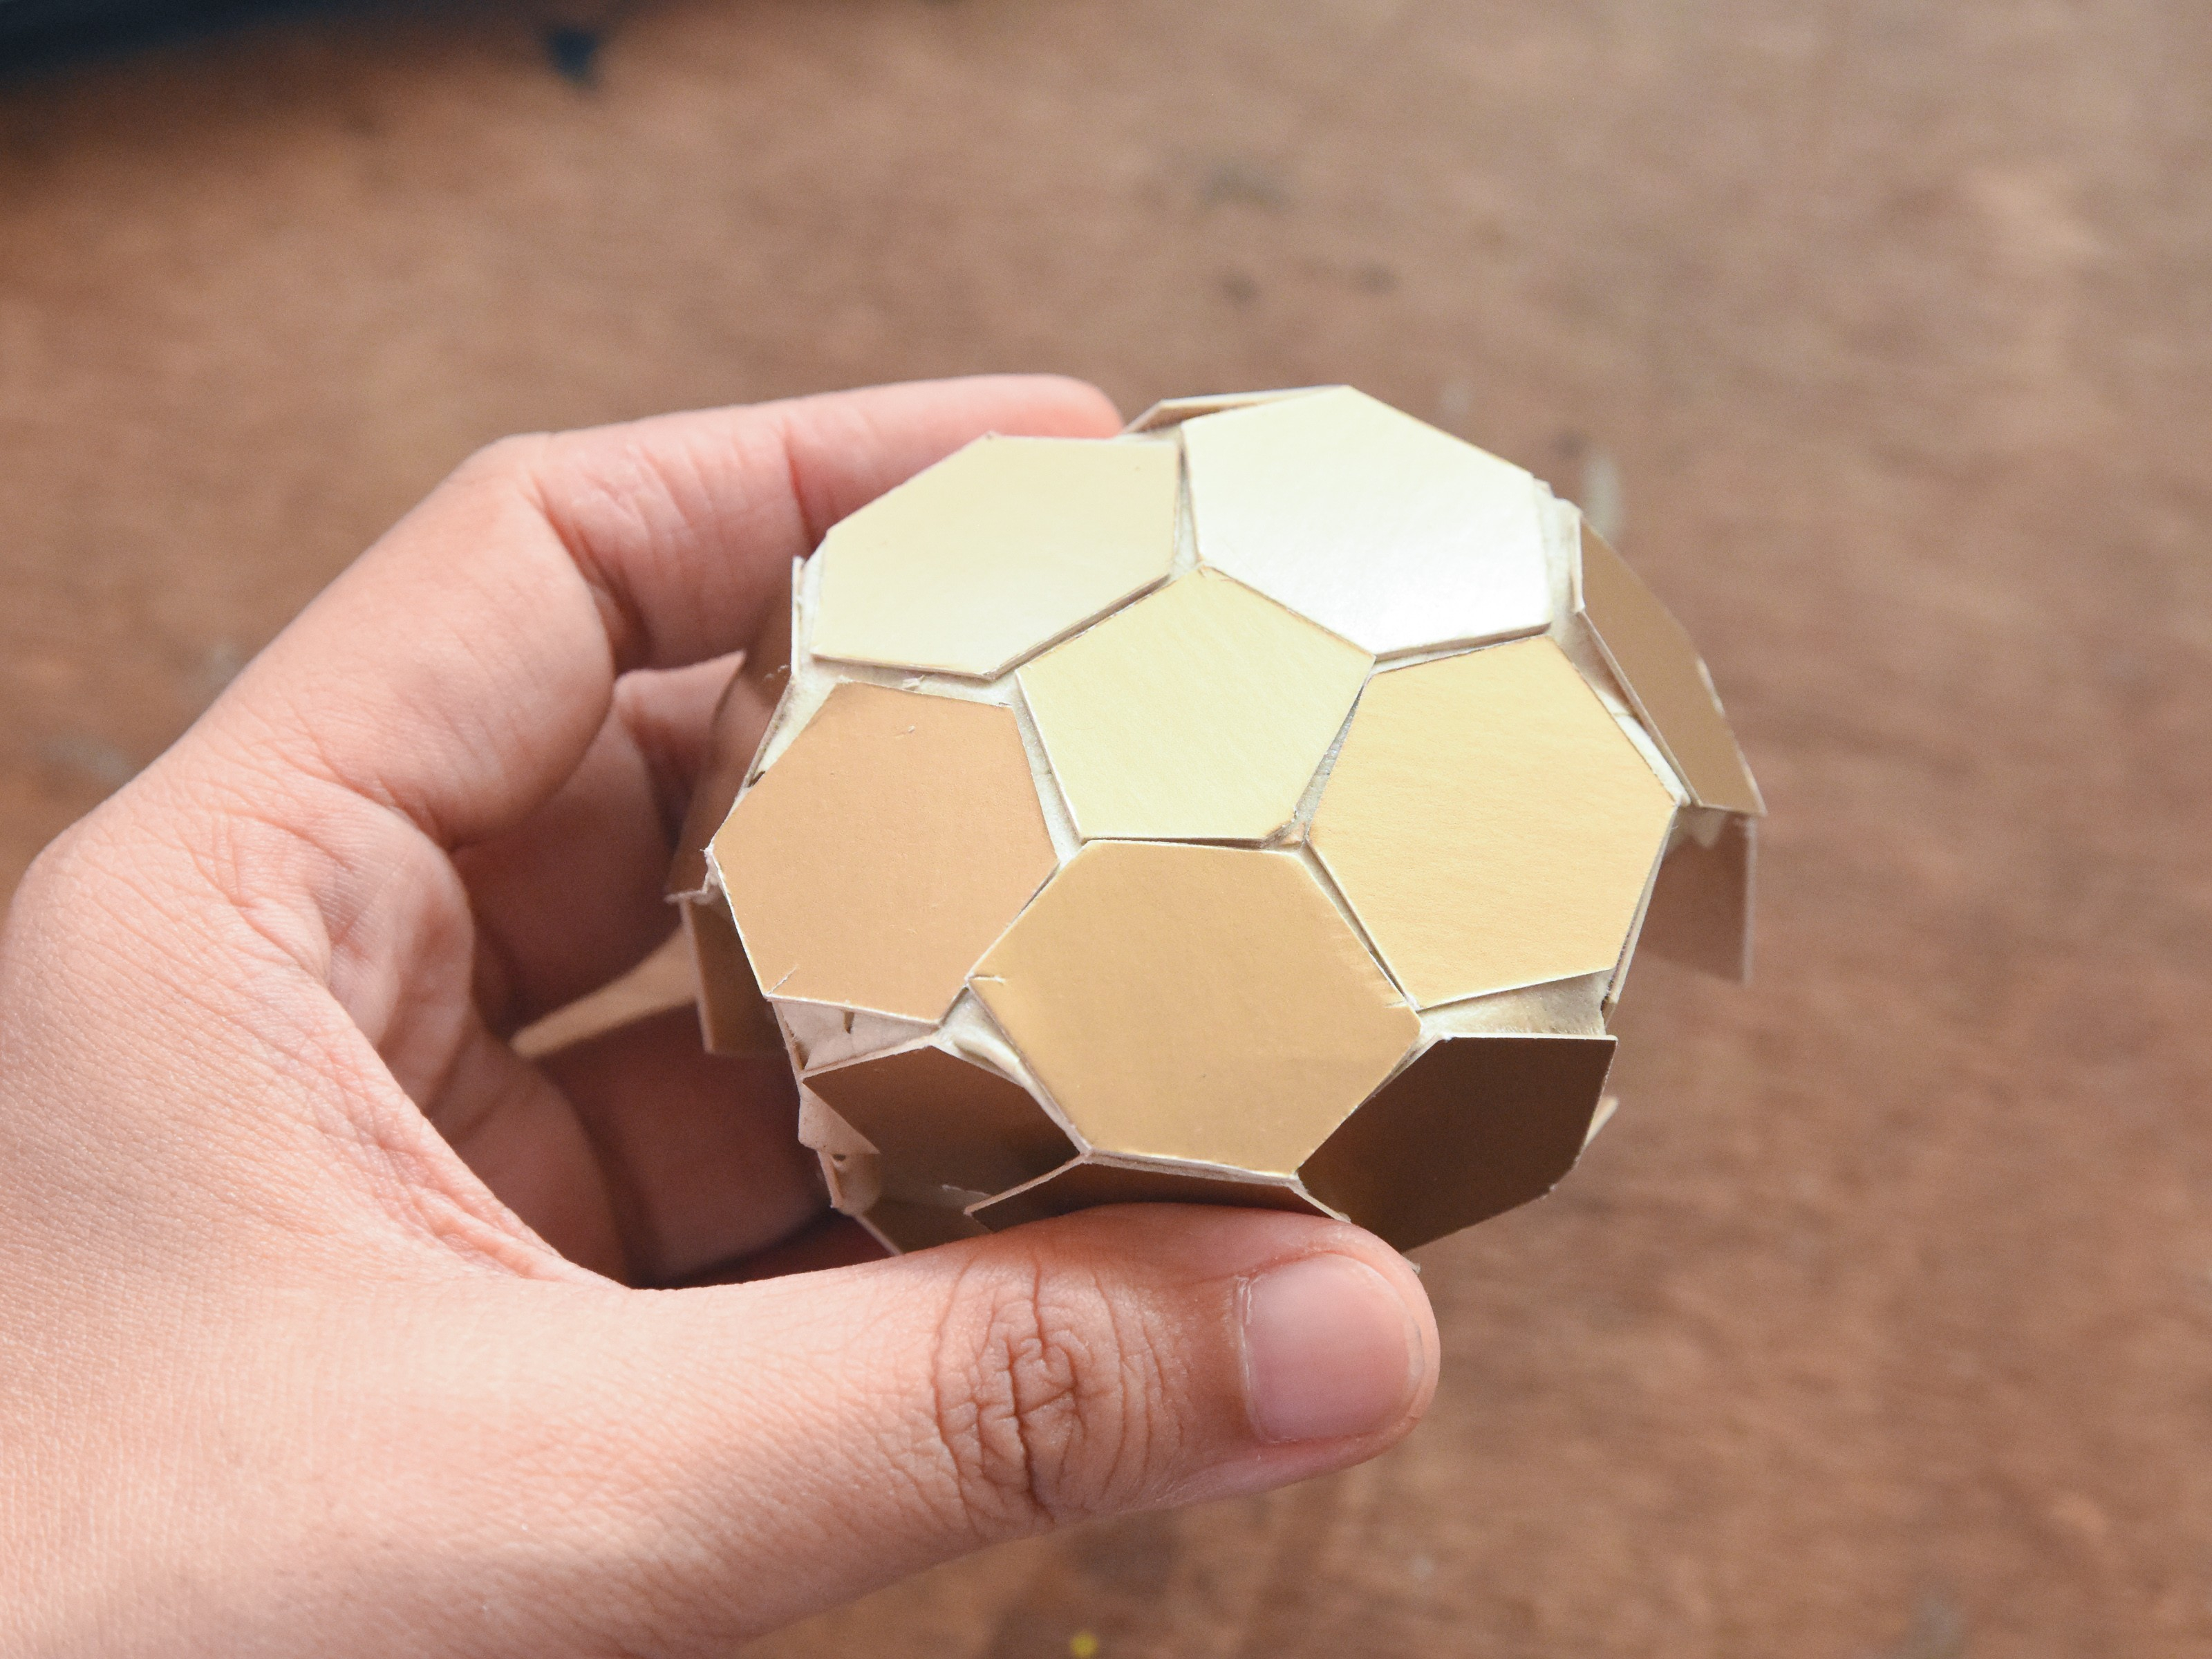 How To Make Origami Soccer Ball Papercraft Ball 3 Ways To Make A Sphere Out Of Paper Wikihow